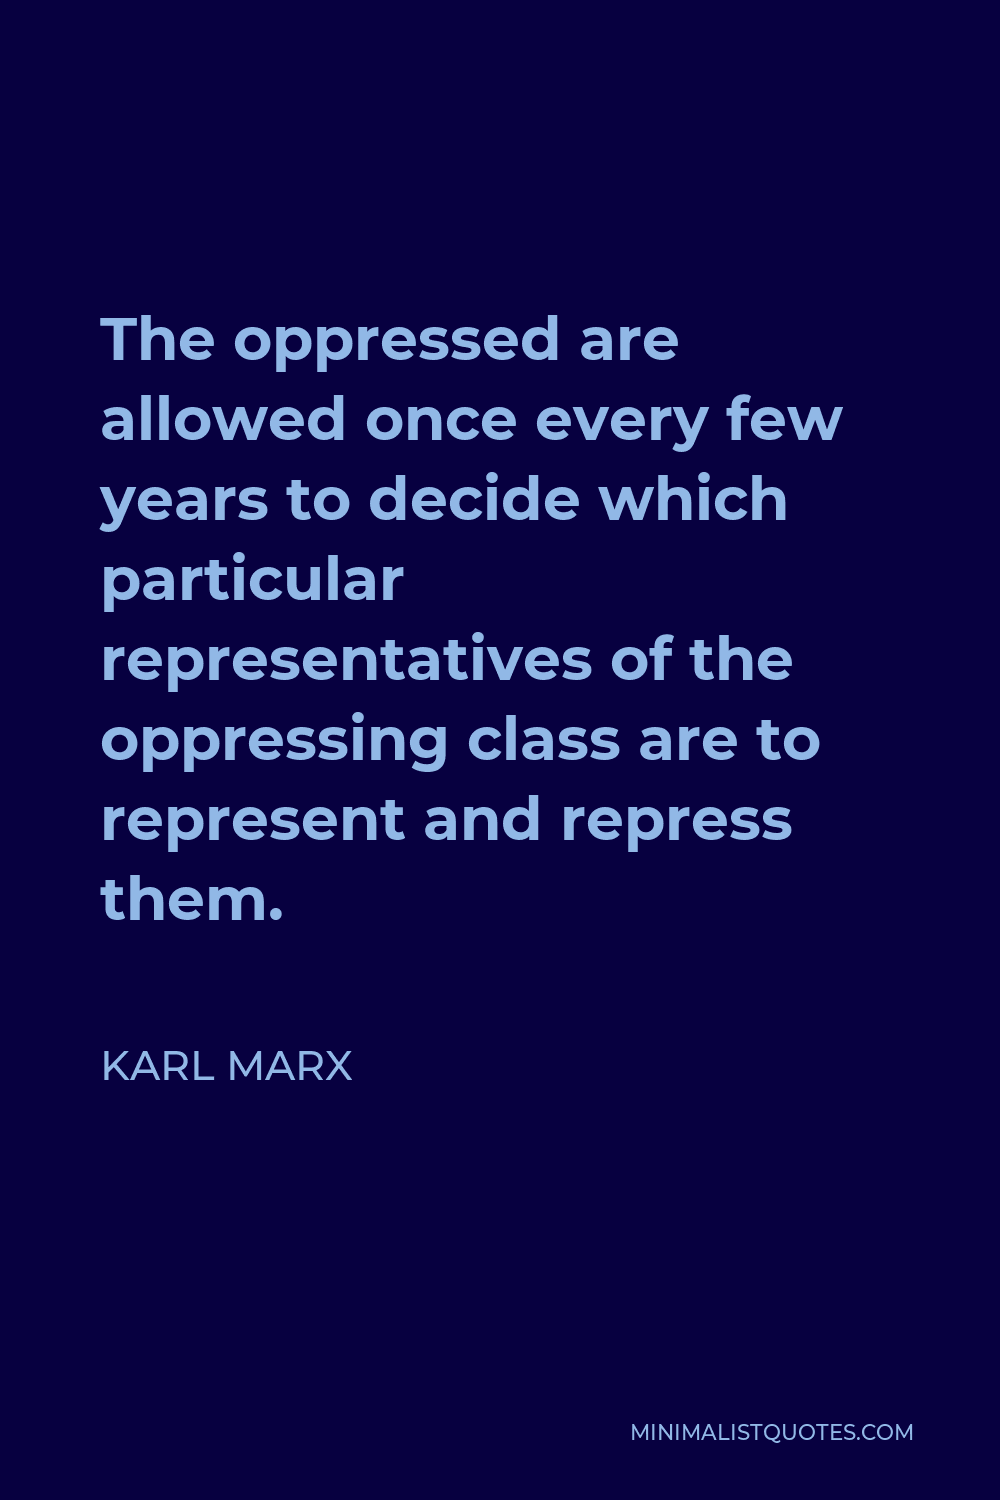 Vladimir Lenin Quote - The oppressed are allowed once every few years to decide which particular representatives of the oppressing class are to represent and repress them in parliament.